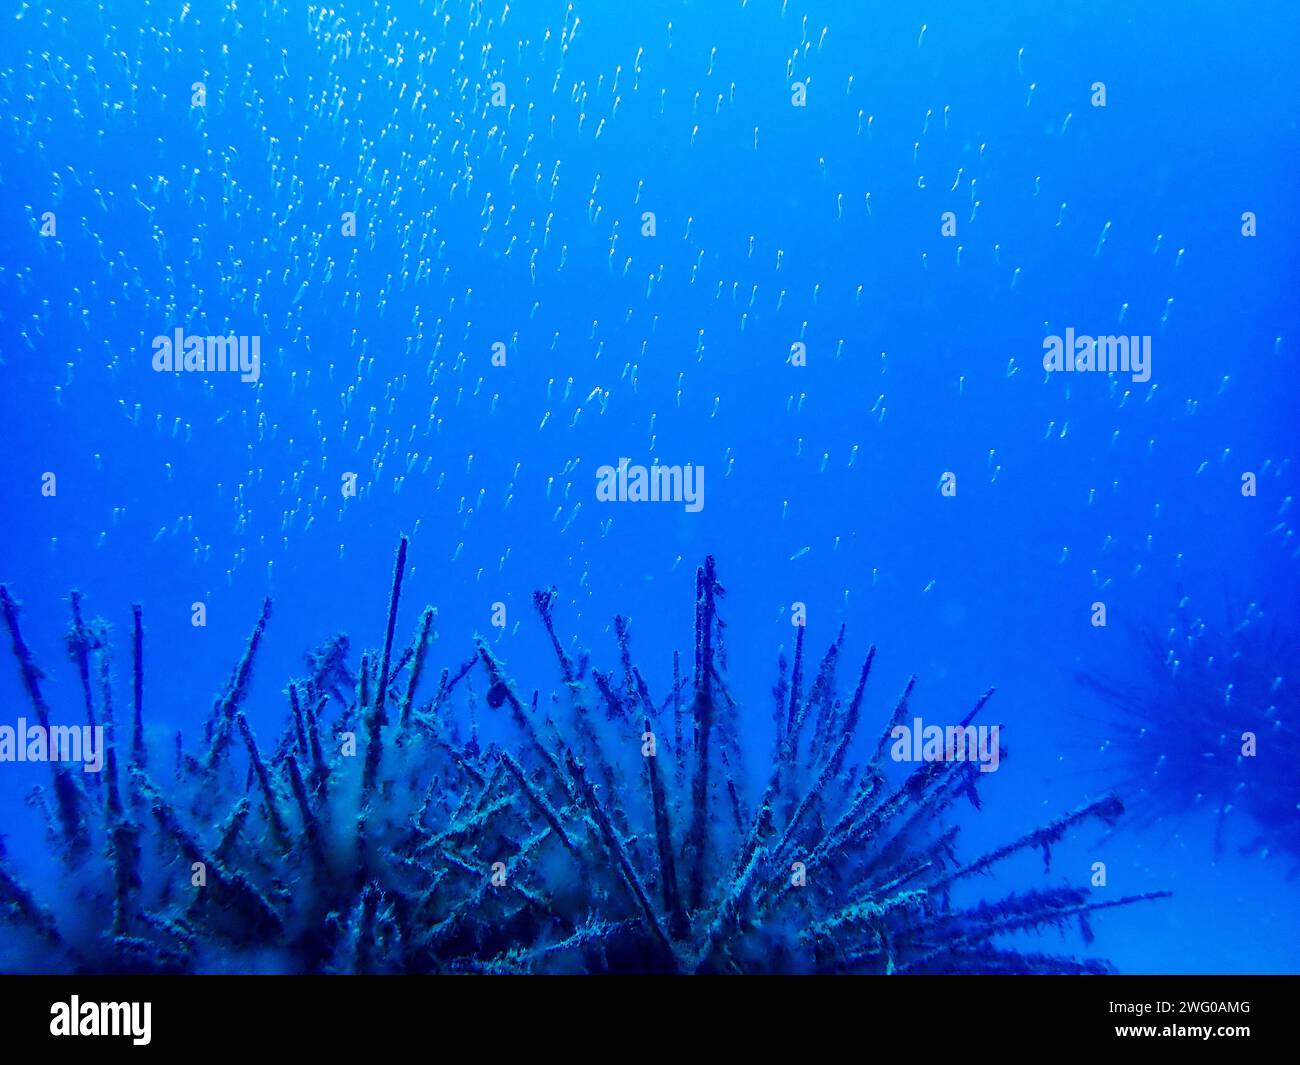 An ethereal underwater dance: a radiant shoal of small fish glows amid the blue gradient of Lanzarote's Atlantic waters, framed by delicate seaweed be Stock Photo